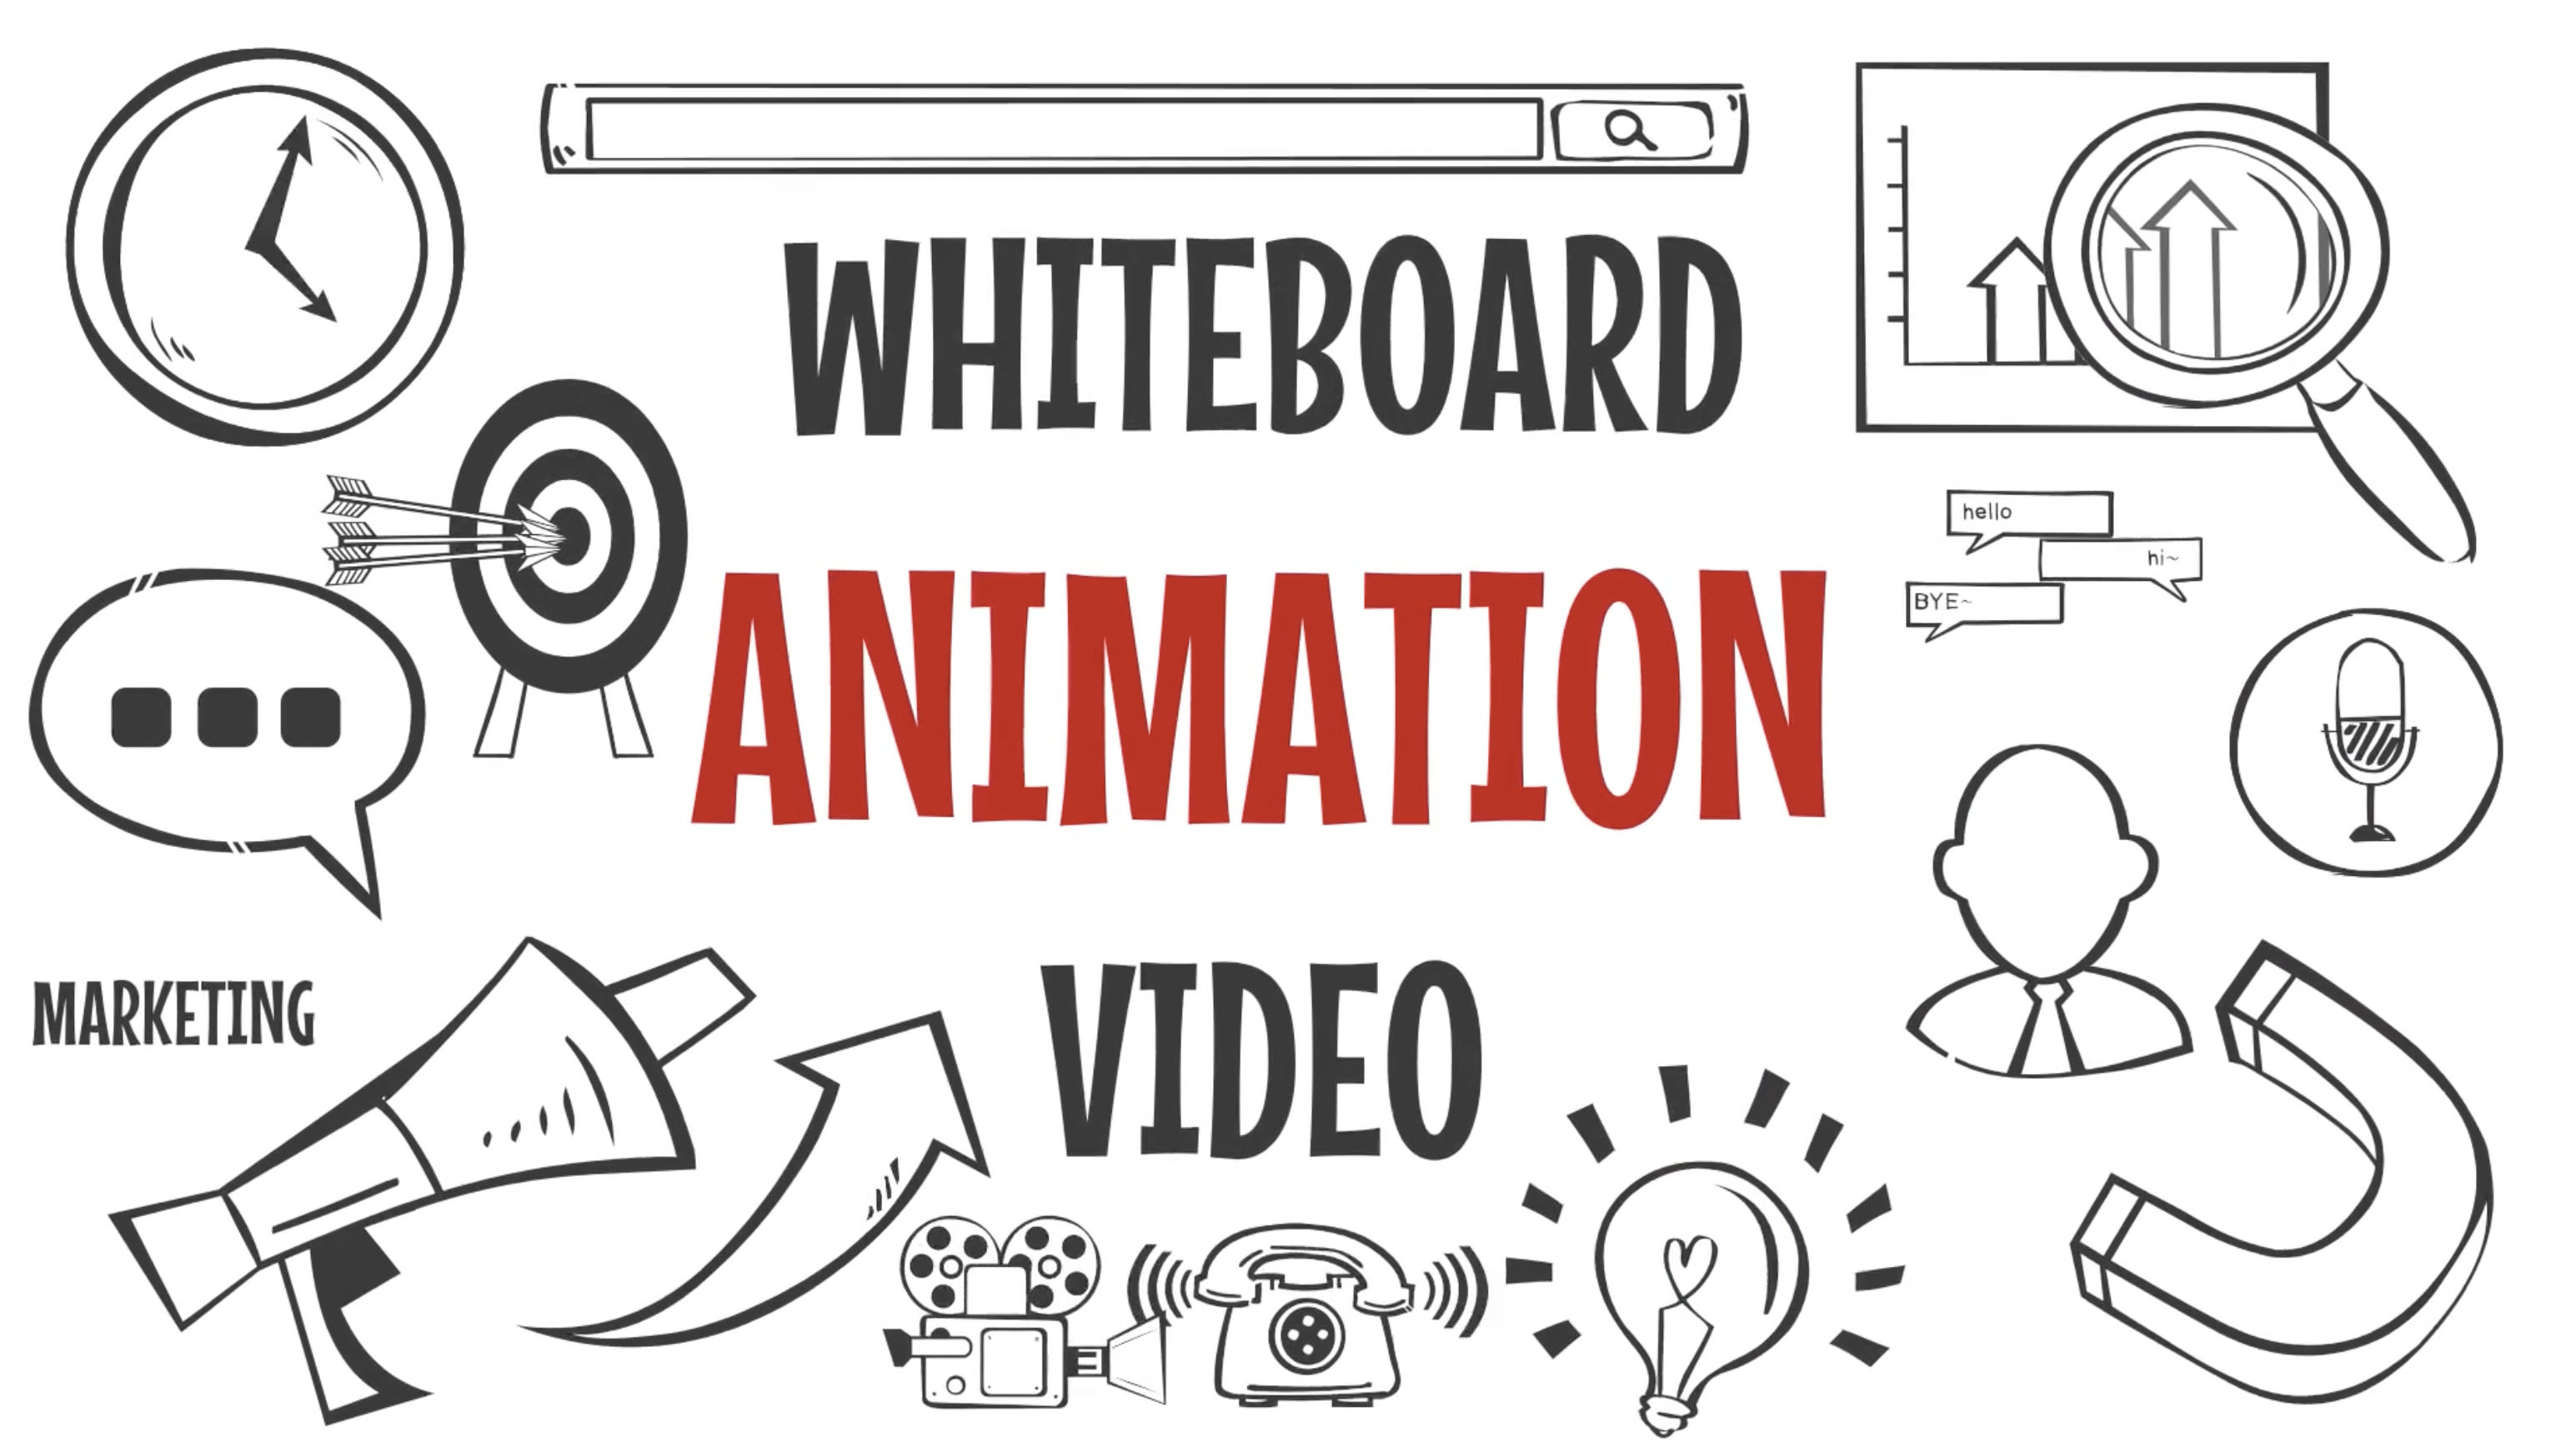 Create whiteboard animation explainer video by Khan_16 | Fiverr